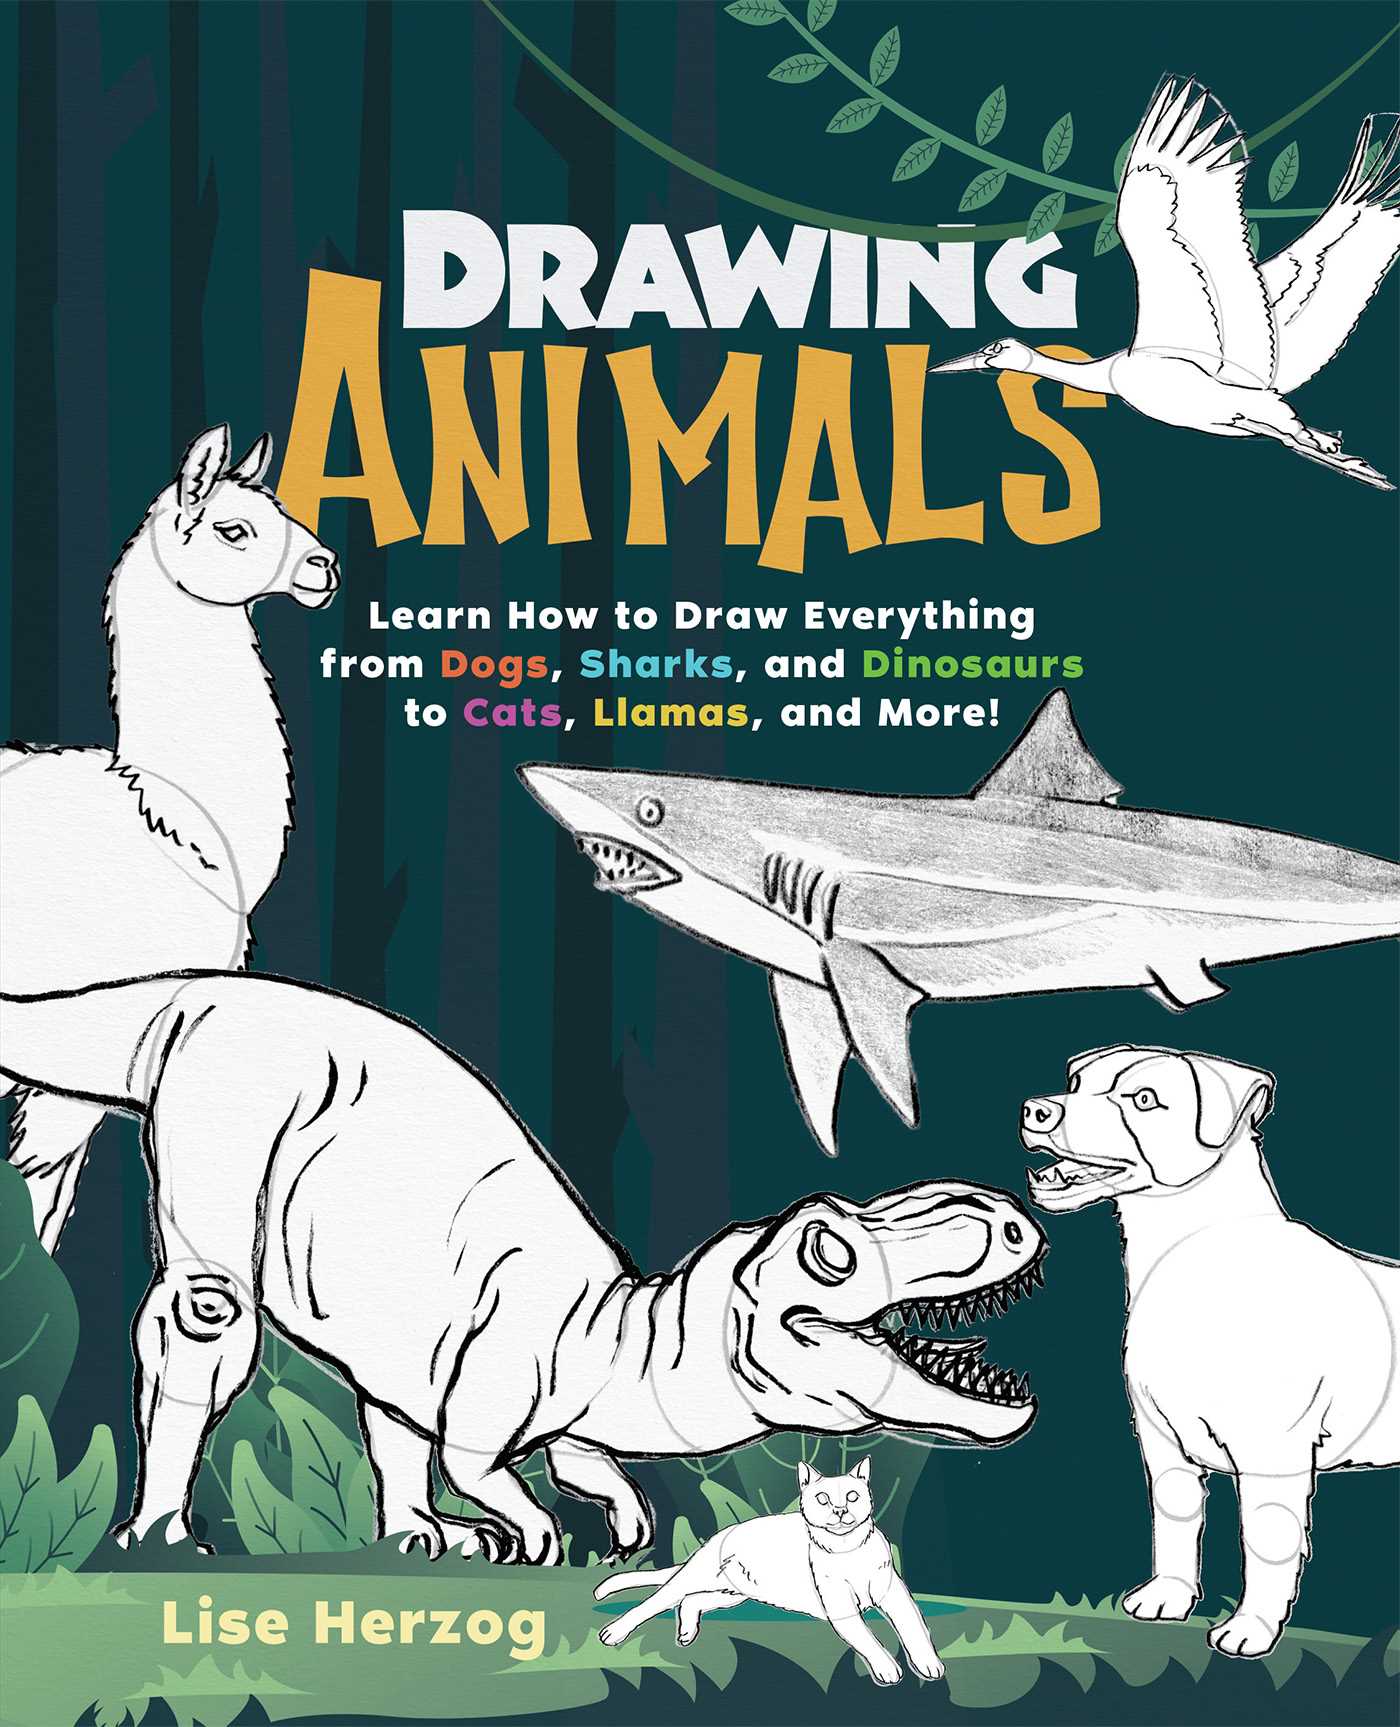 Drawing Animals : Learn How to Draw Everything from Dogs, Sharks, and Dinosaurs to Cats, Llamas, and More!